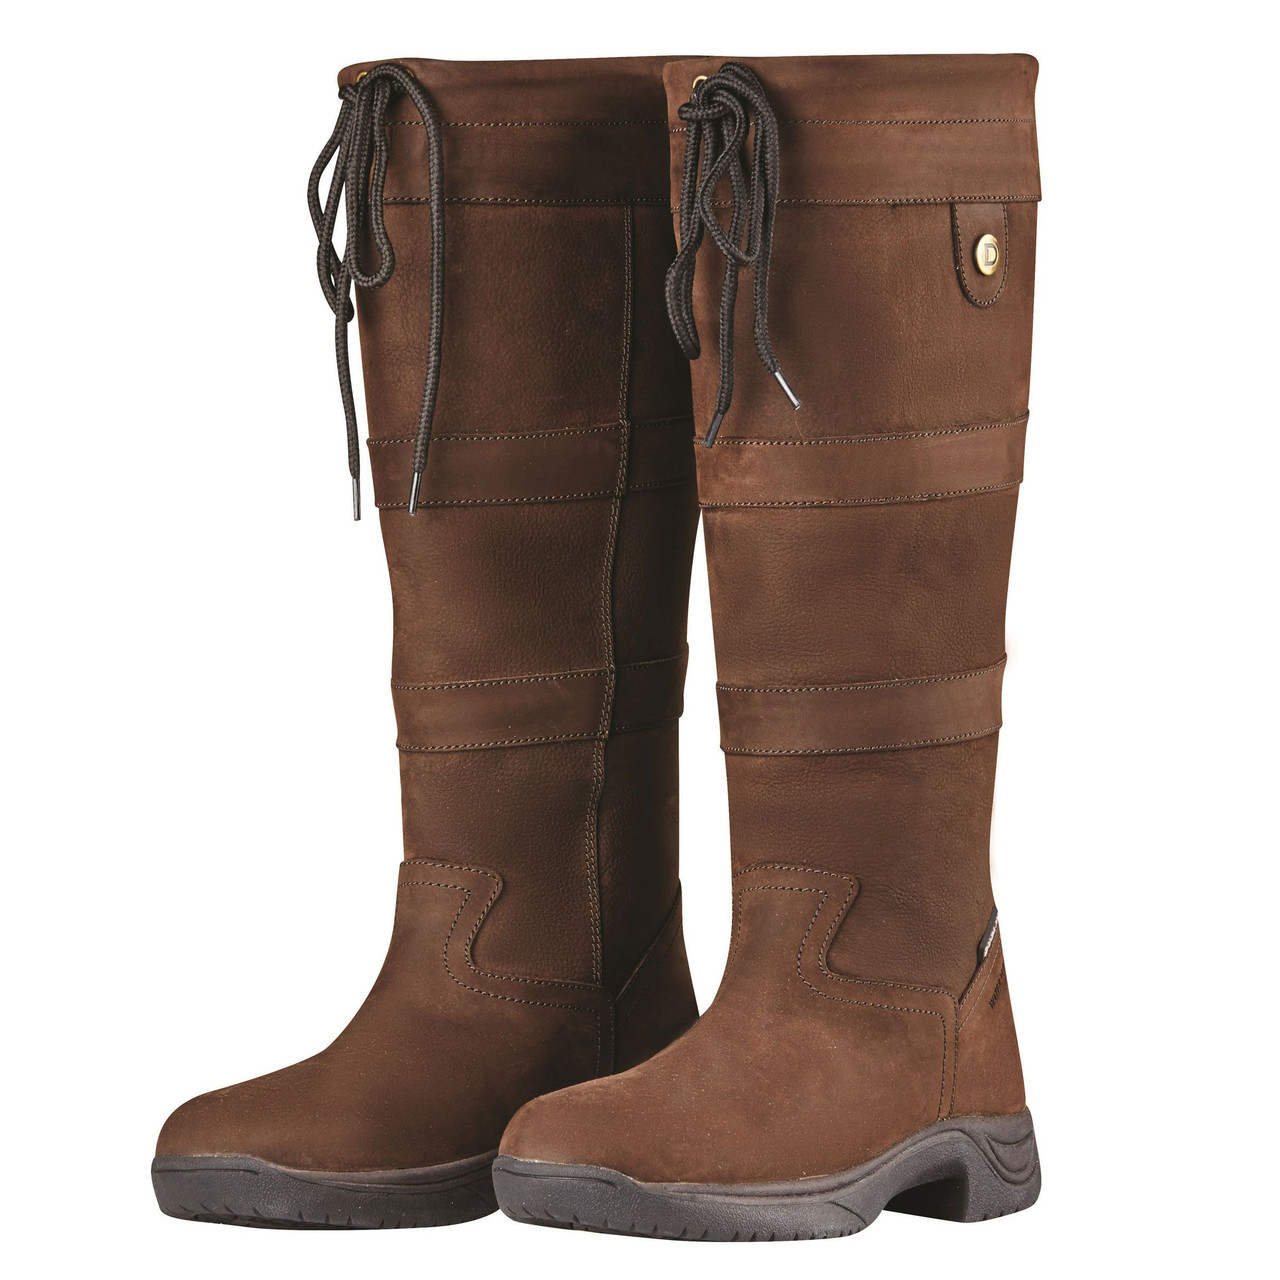 Ladies Boots Available @ Best Price Online